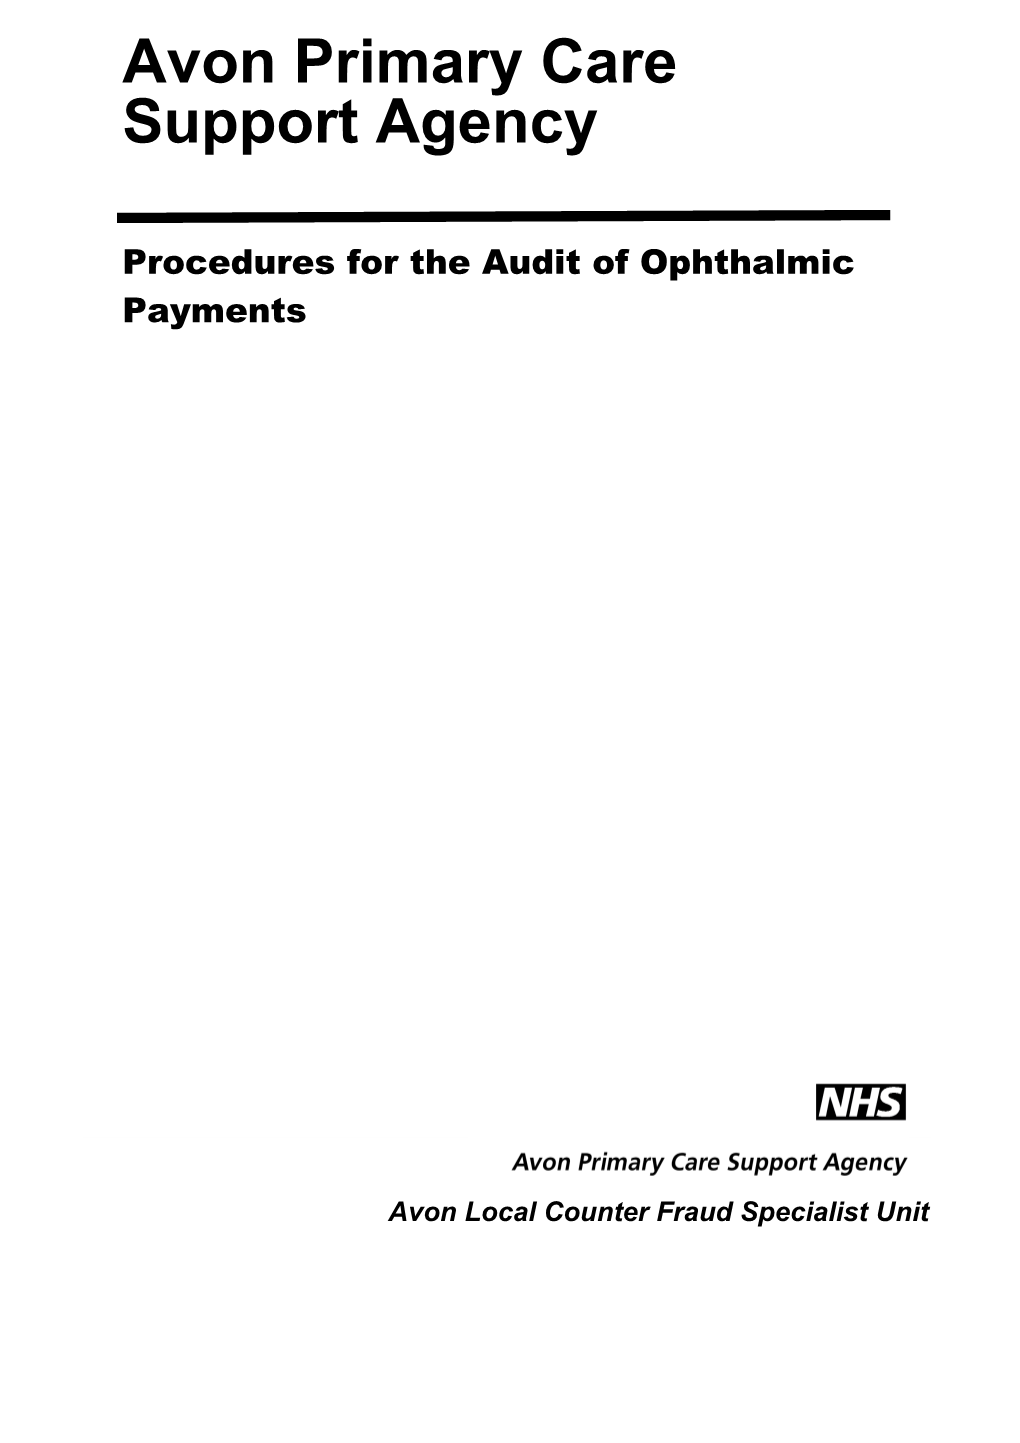 Review of Procedures for the Audit of Ophthalmic Claims